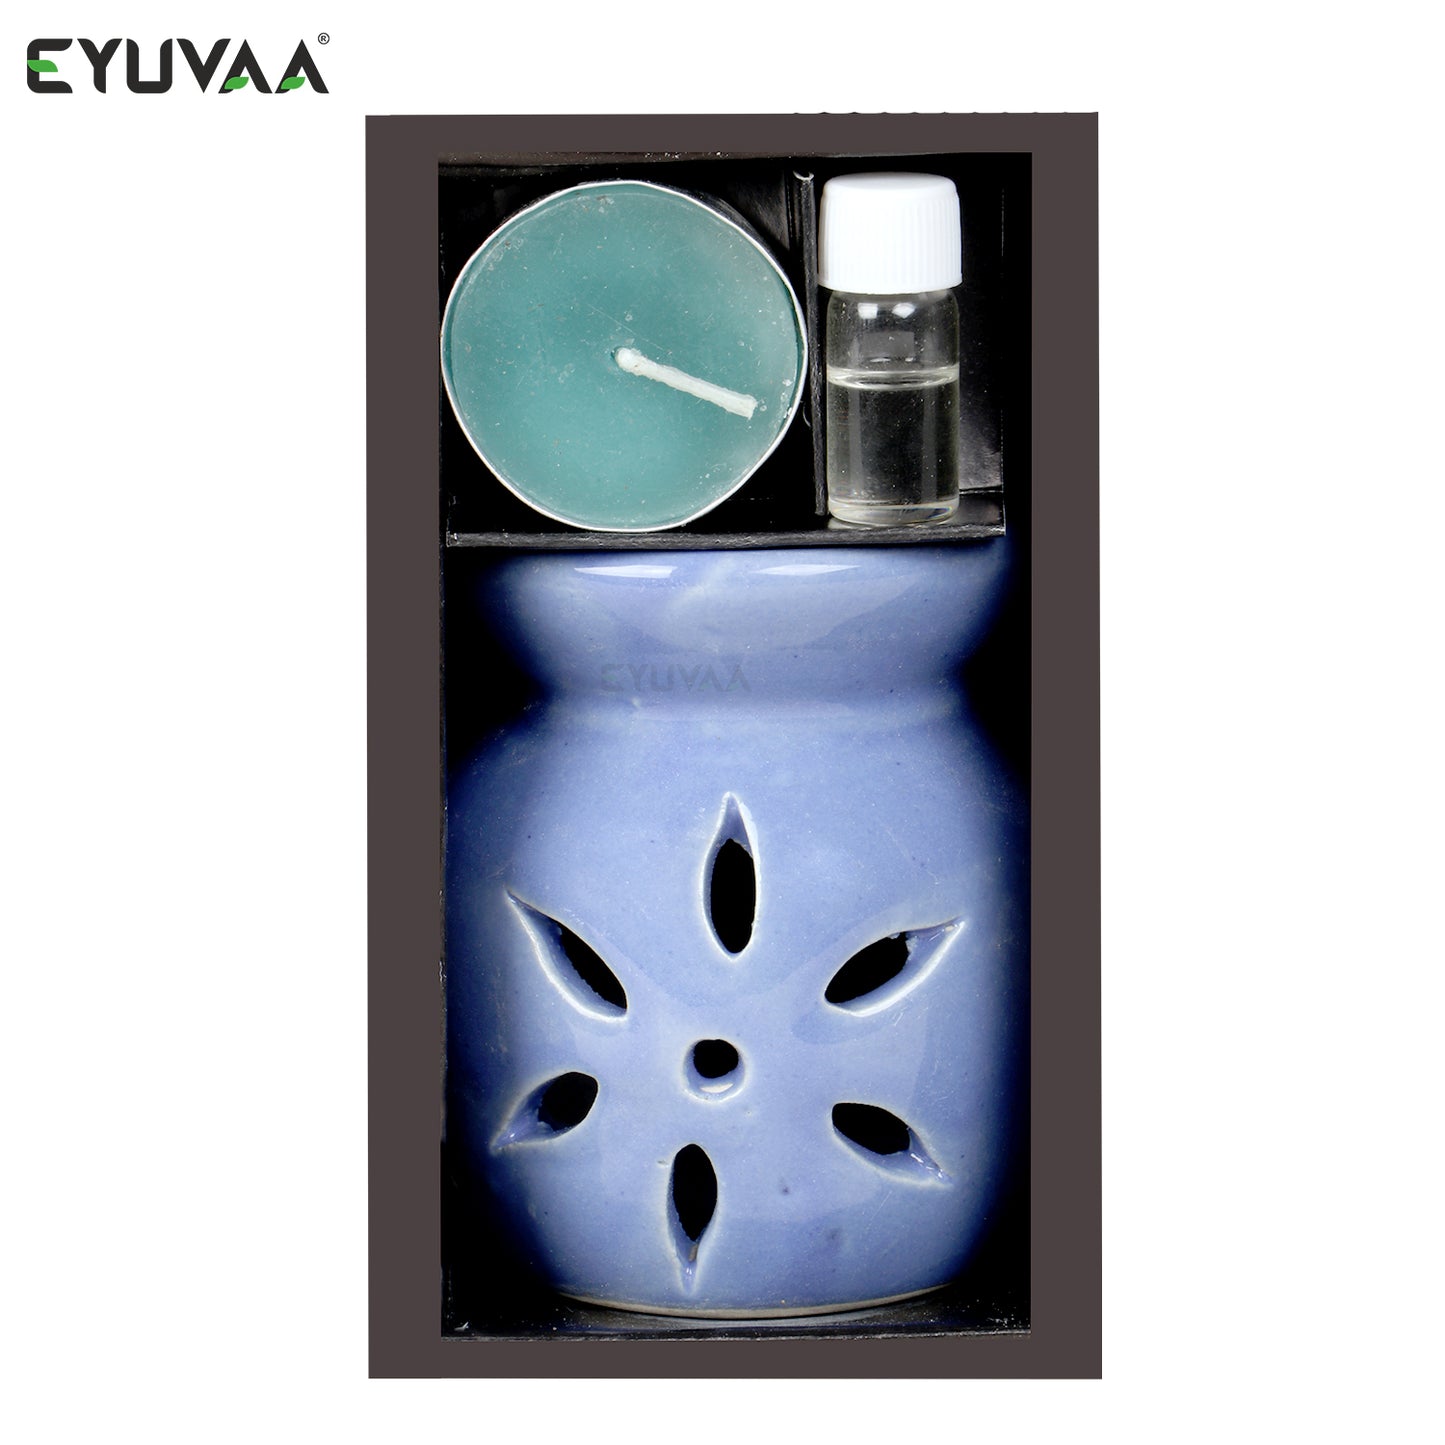 Combo Pack of Colored Ceramic Diffuser with Tea Light Candle & Aroma Oil (Blue)